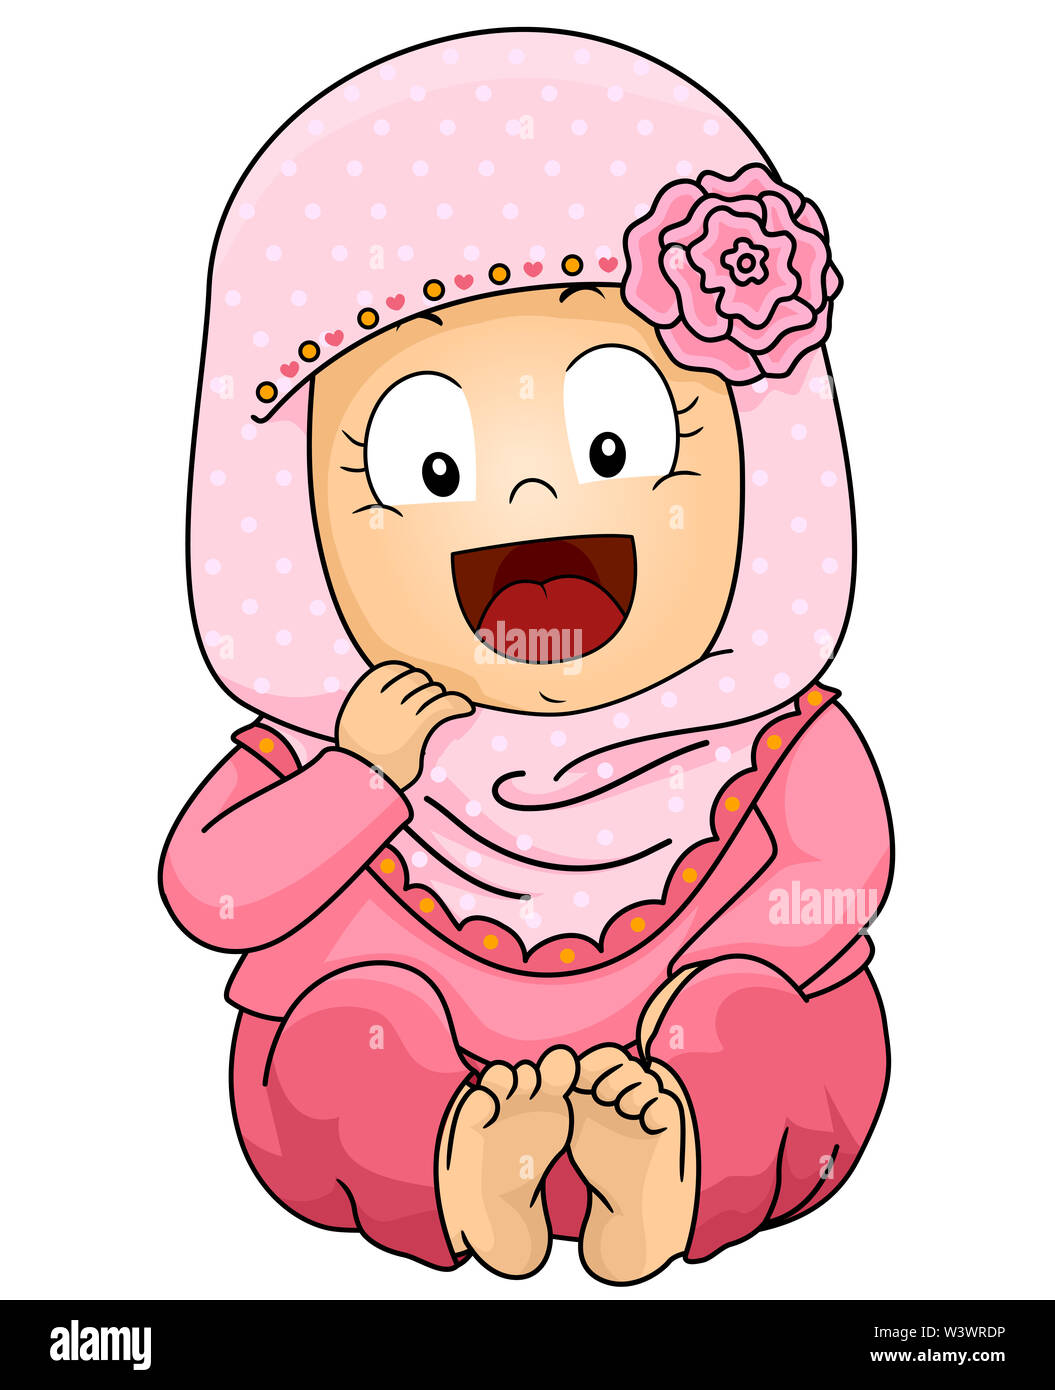 Illustration of a Cute Baby Muslim Girl Wearing Pink Hijab Stock ...